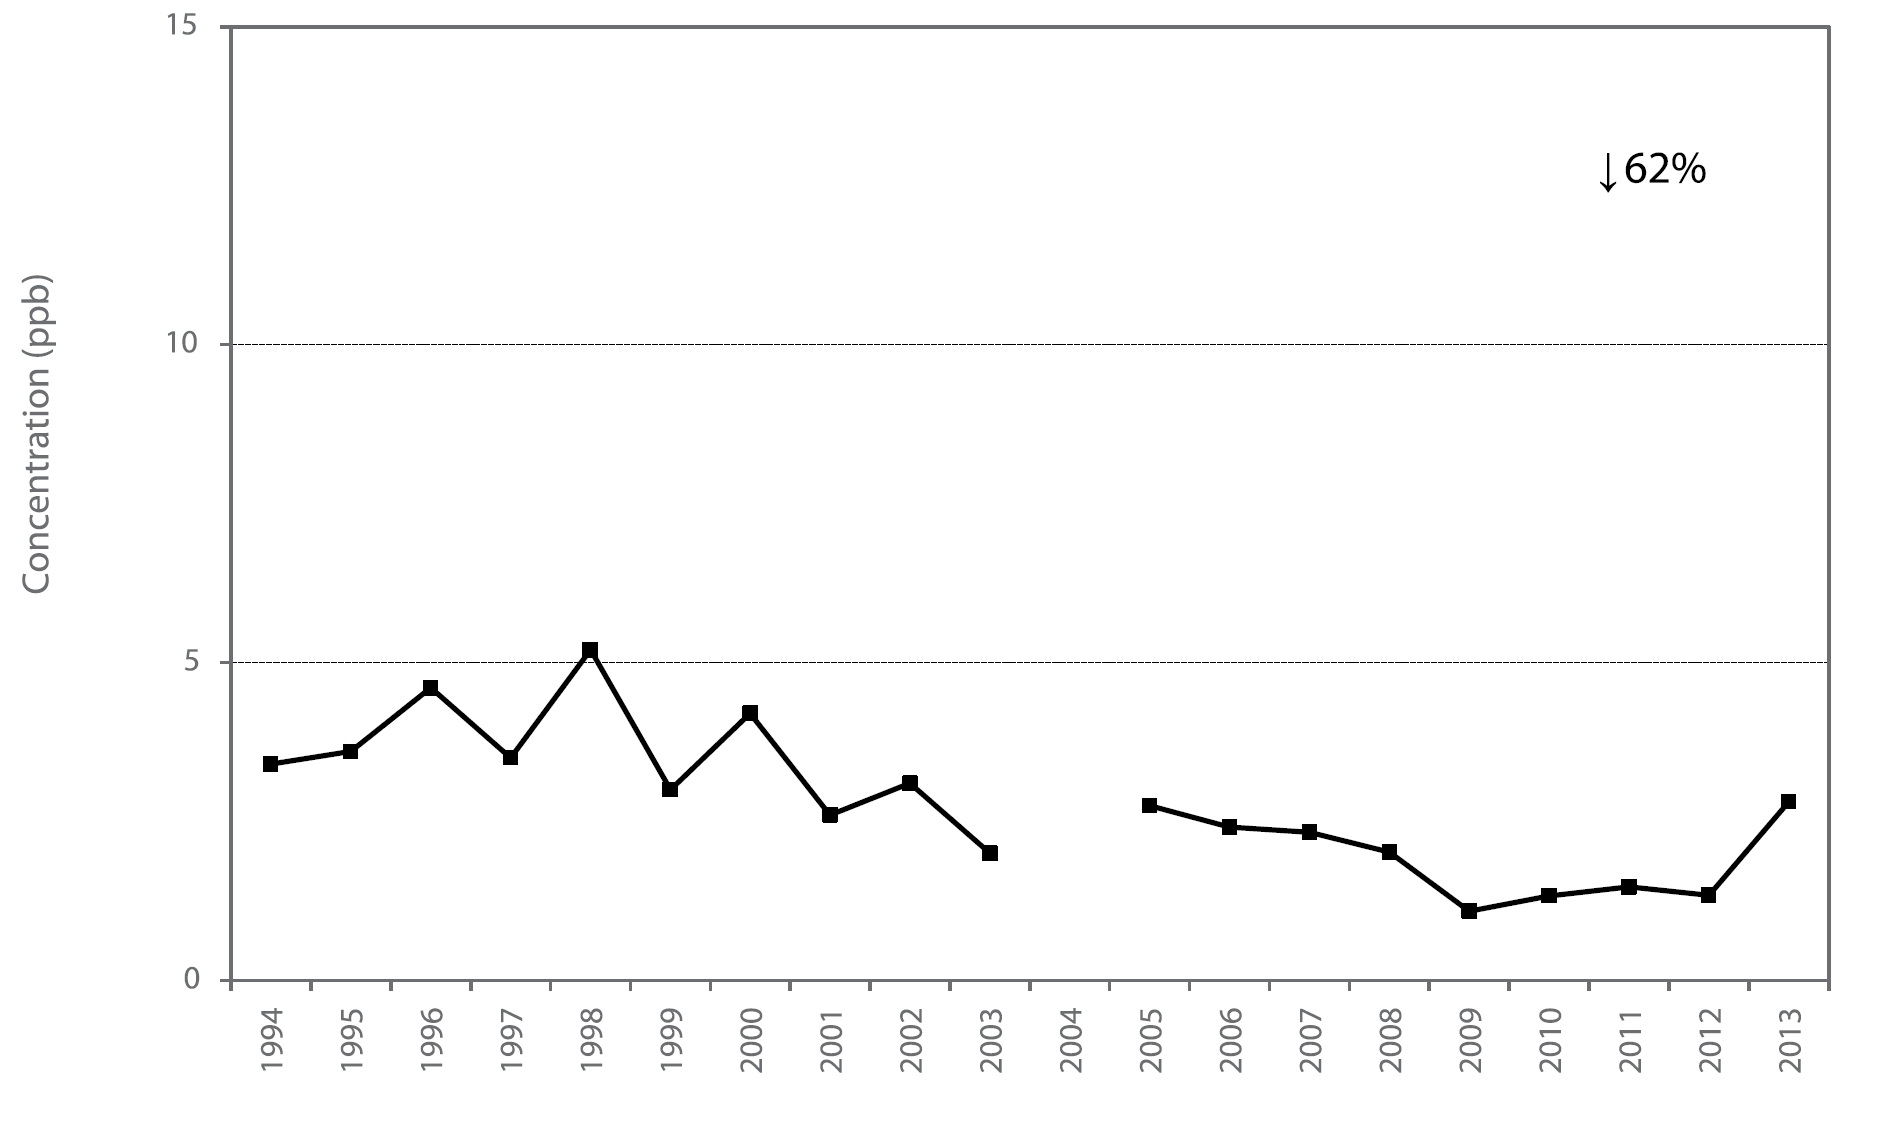 Figure A48 is a line chart displaying the sulphur dioxide annual mean at Sudbury from 1994 to 2013. Over this 20-year period, sulphur dioxide decreased 62%.